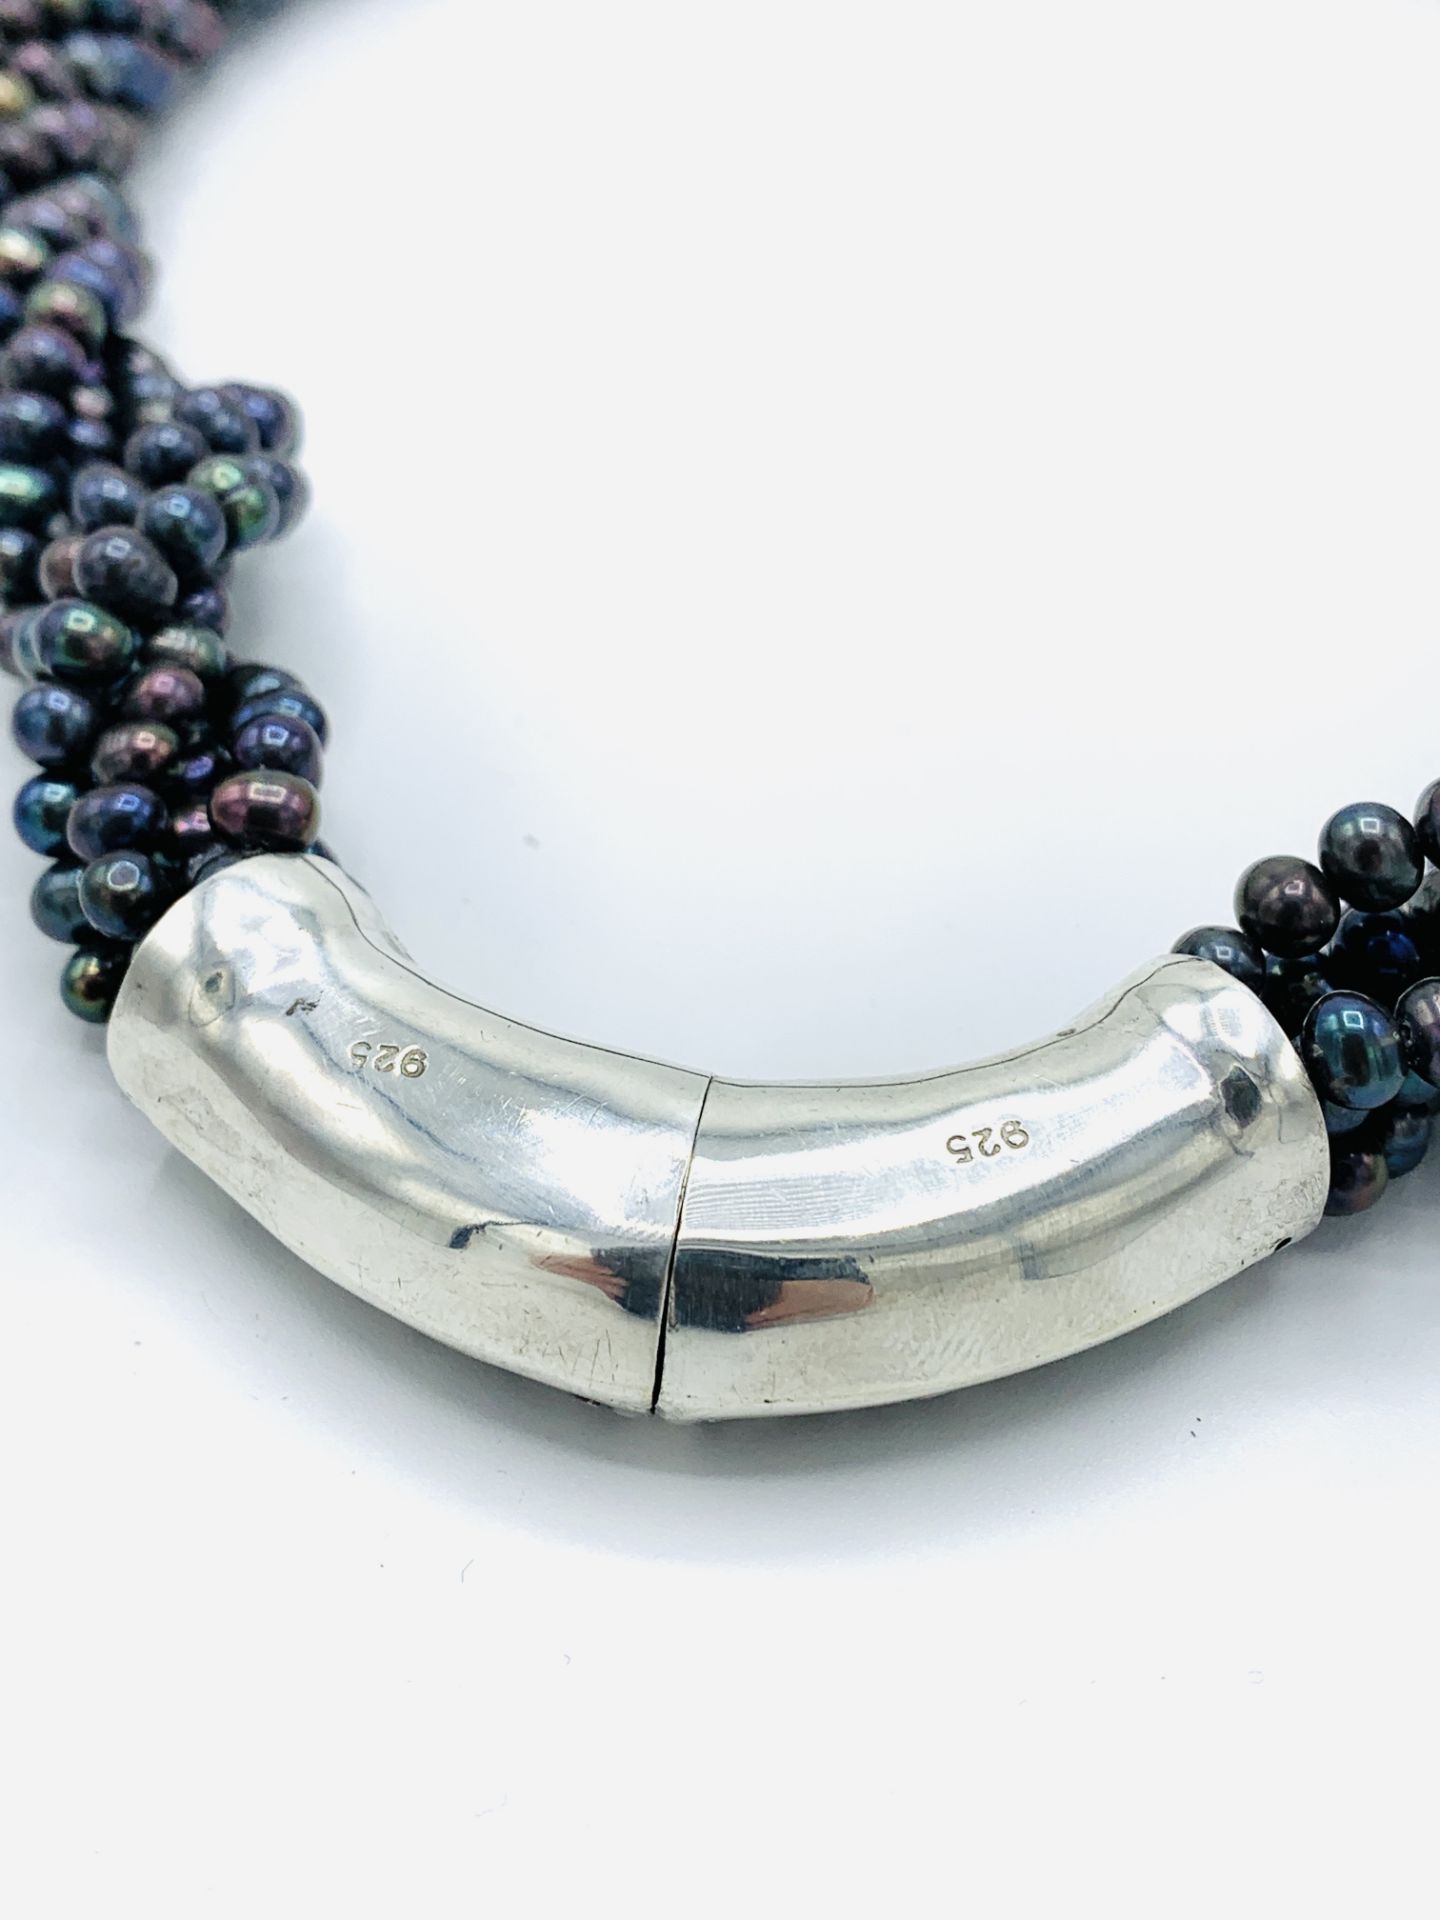 Six strand black Tahitian pearl necklace - Image 2 of 4